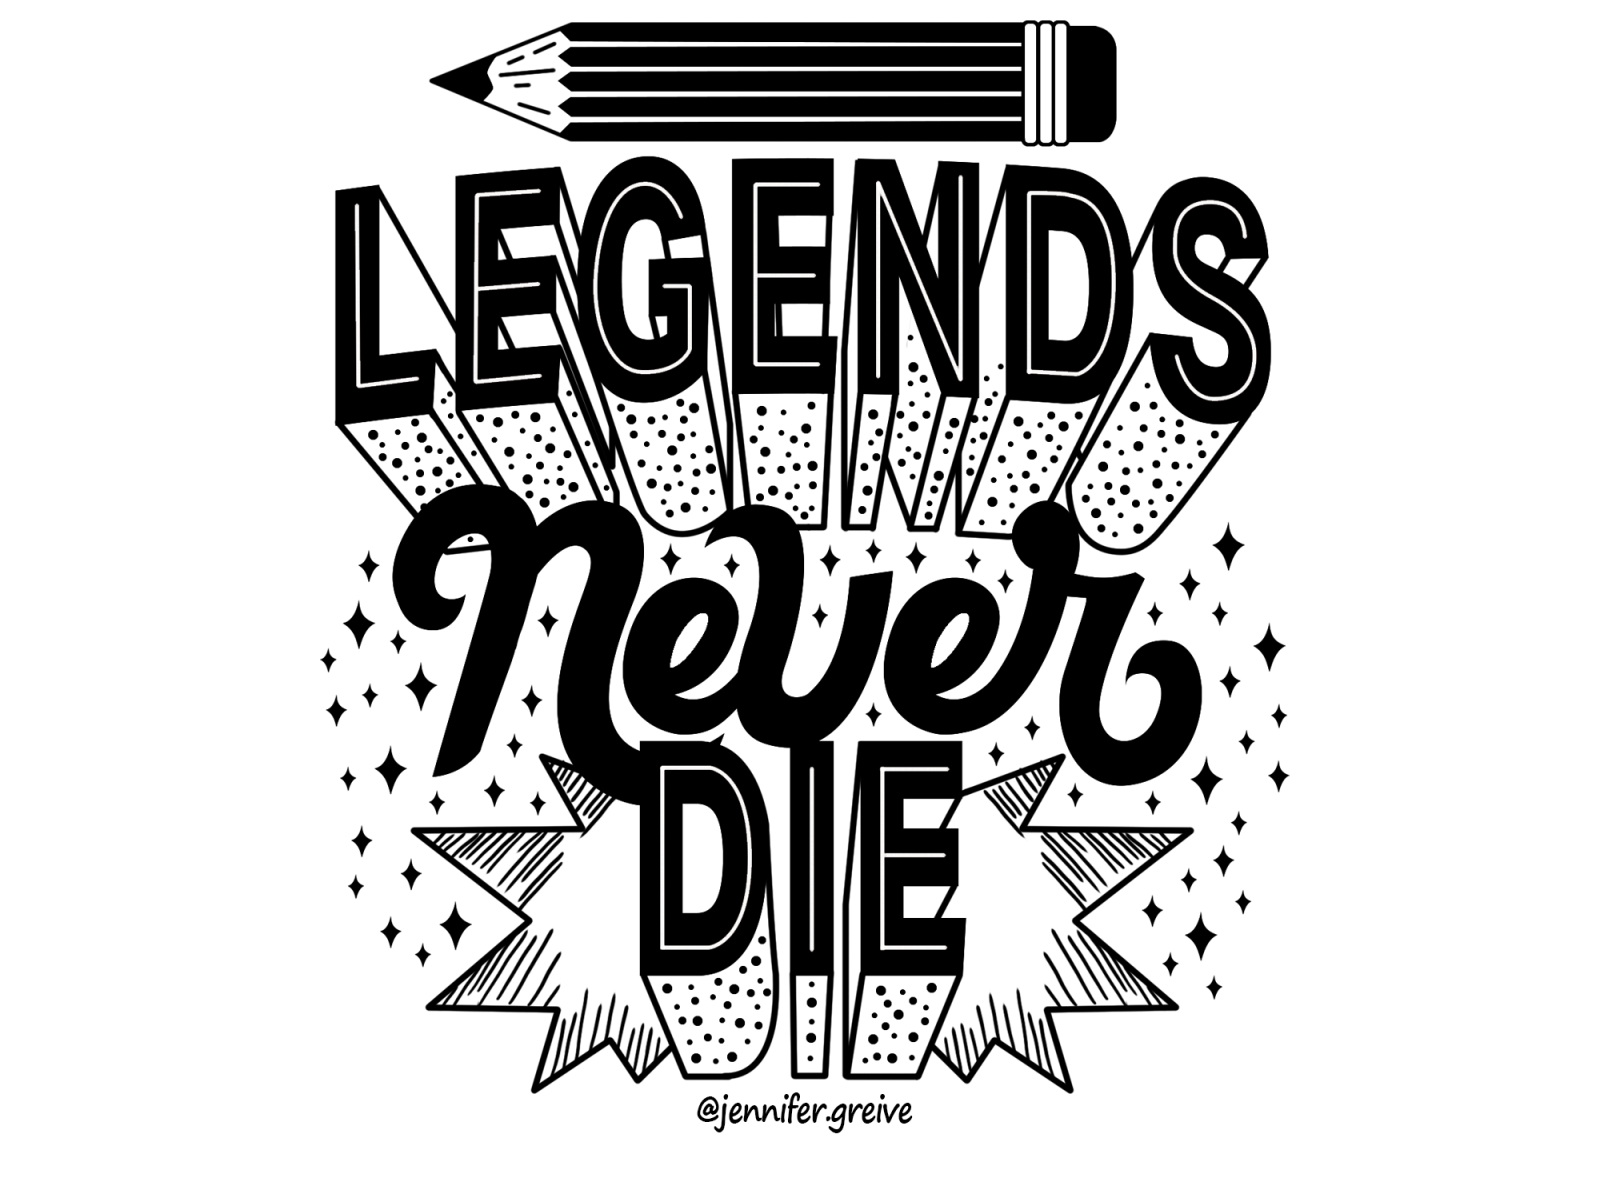 Legends Never Die Wallpapers - Top Free Legends Never Die Backgrounds - WallpaperAccess